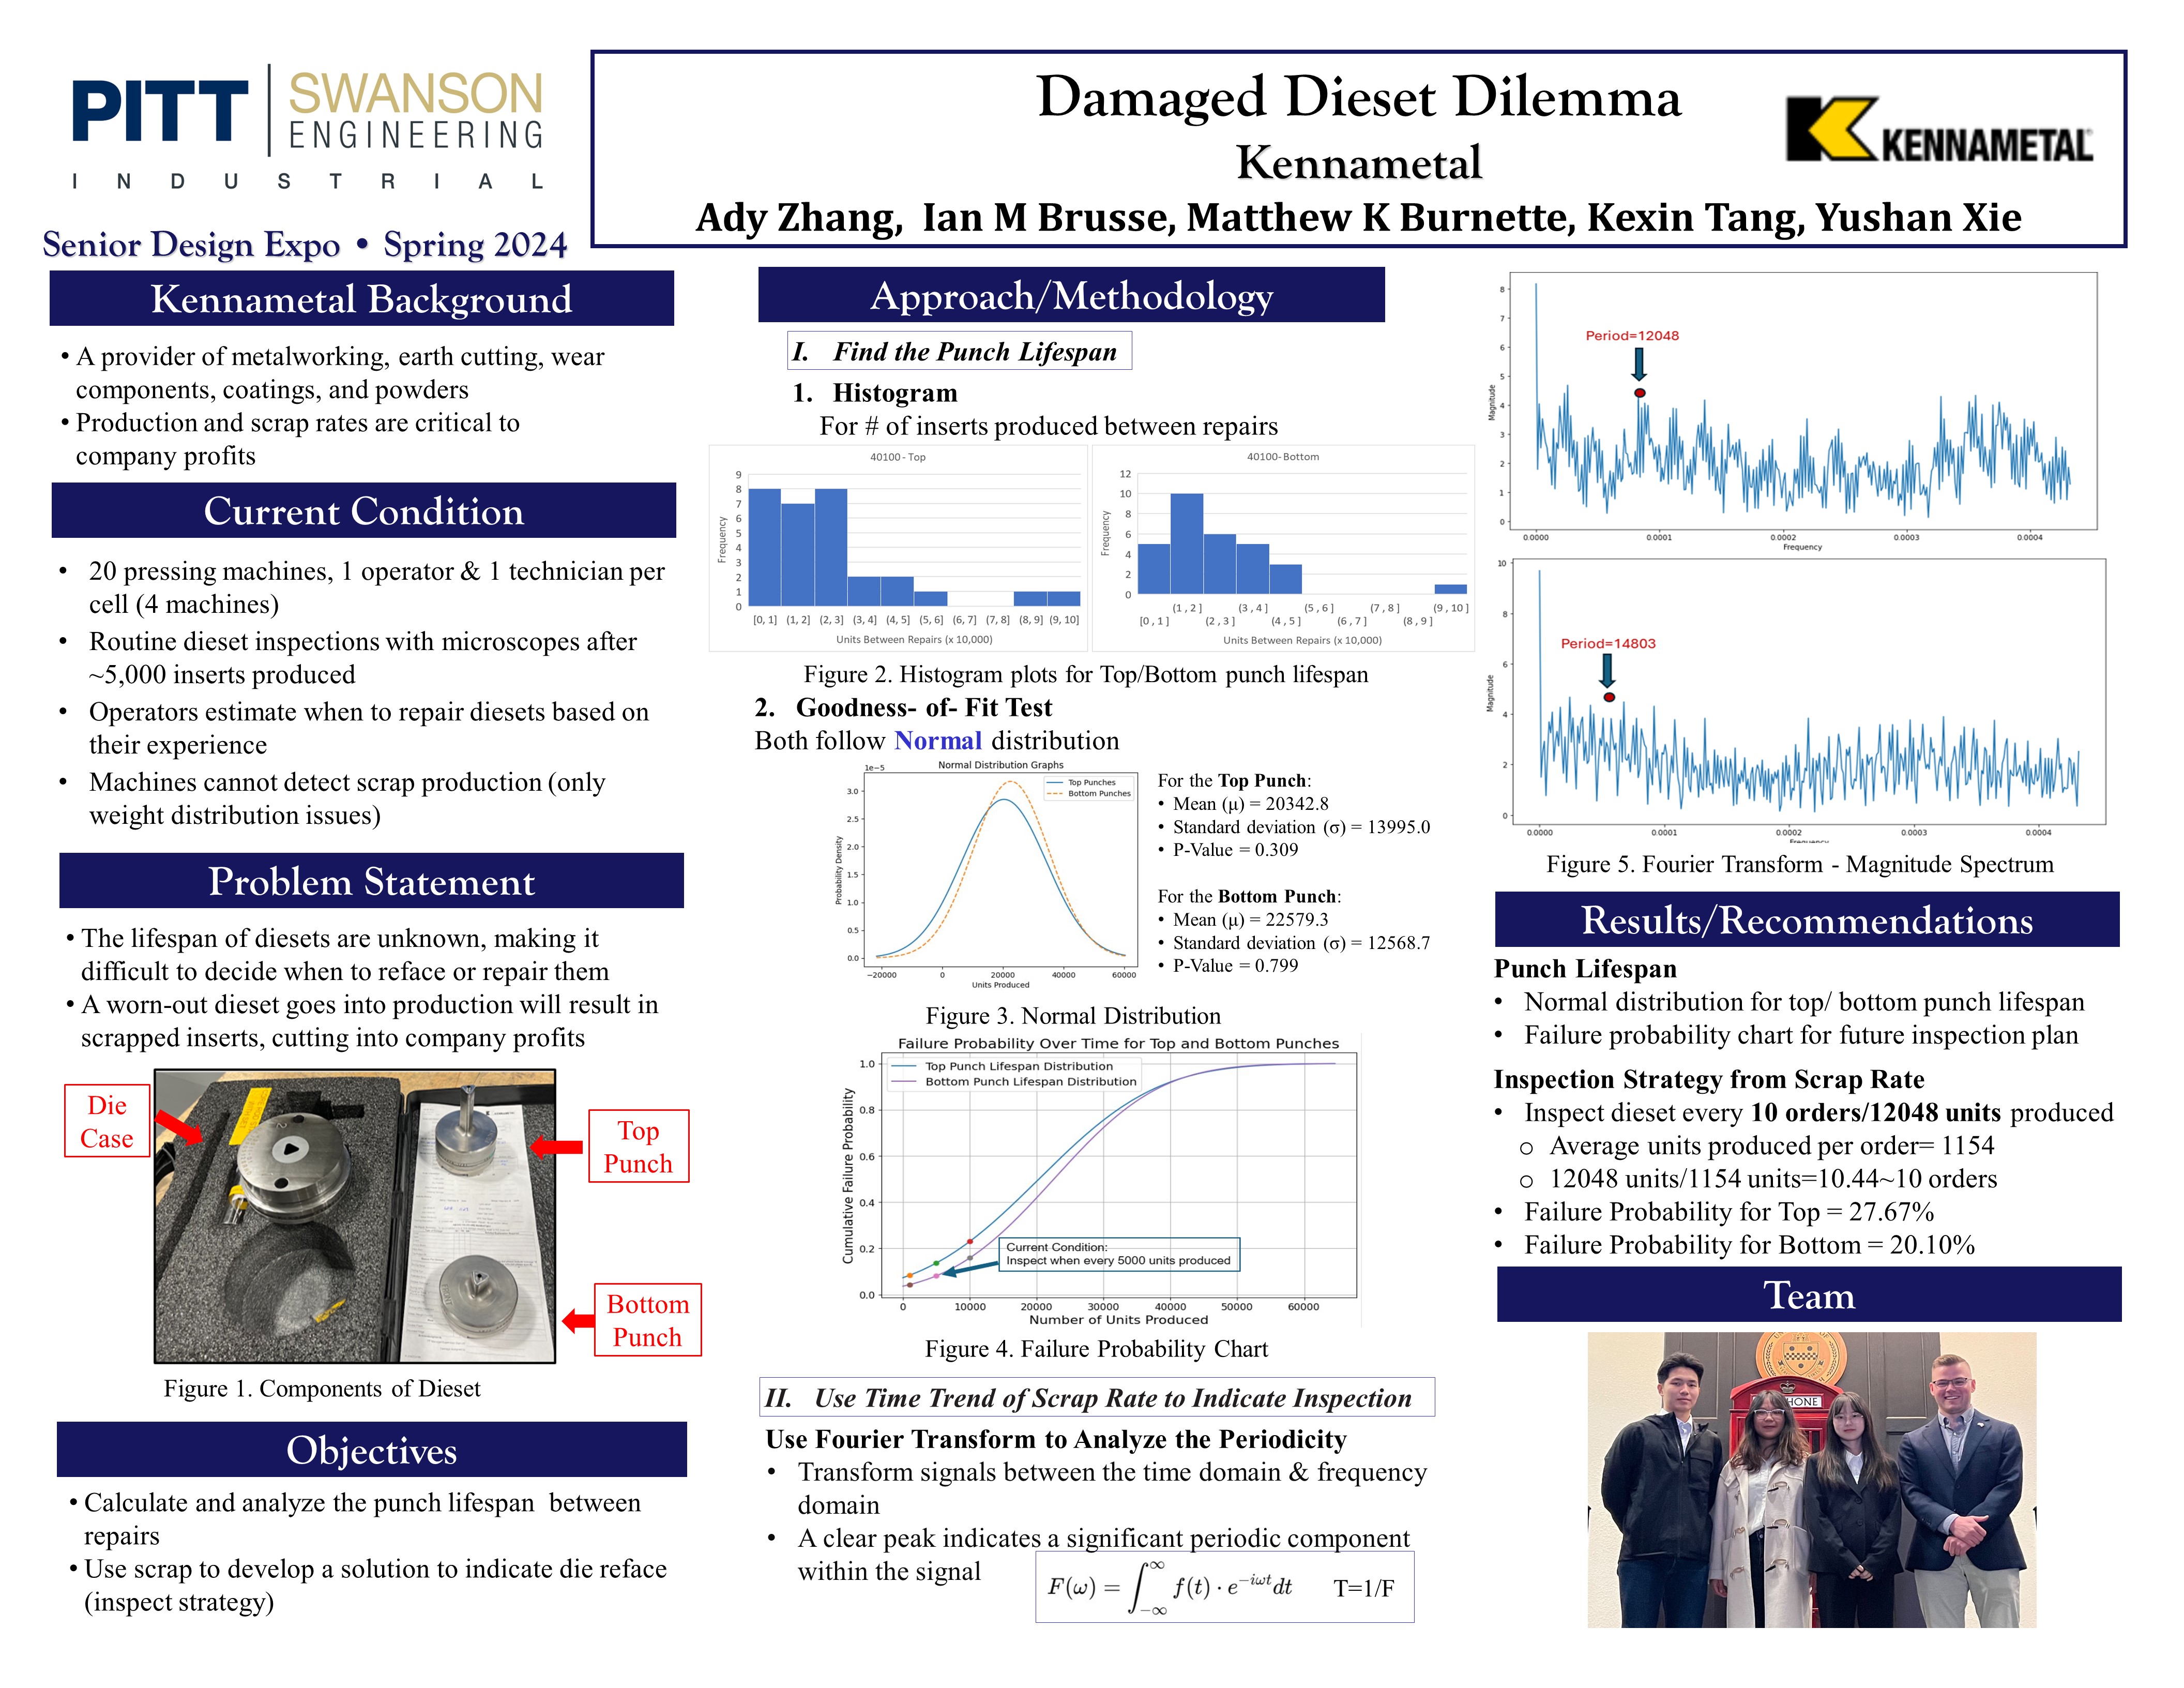 Kennametal Inc., damaged dieset dilemma research poster overview